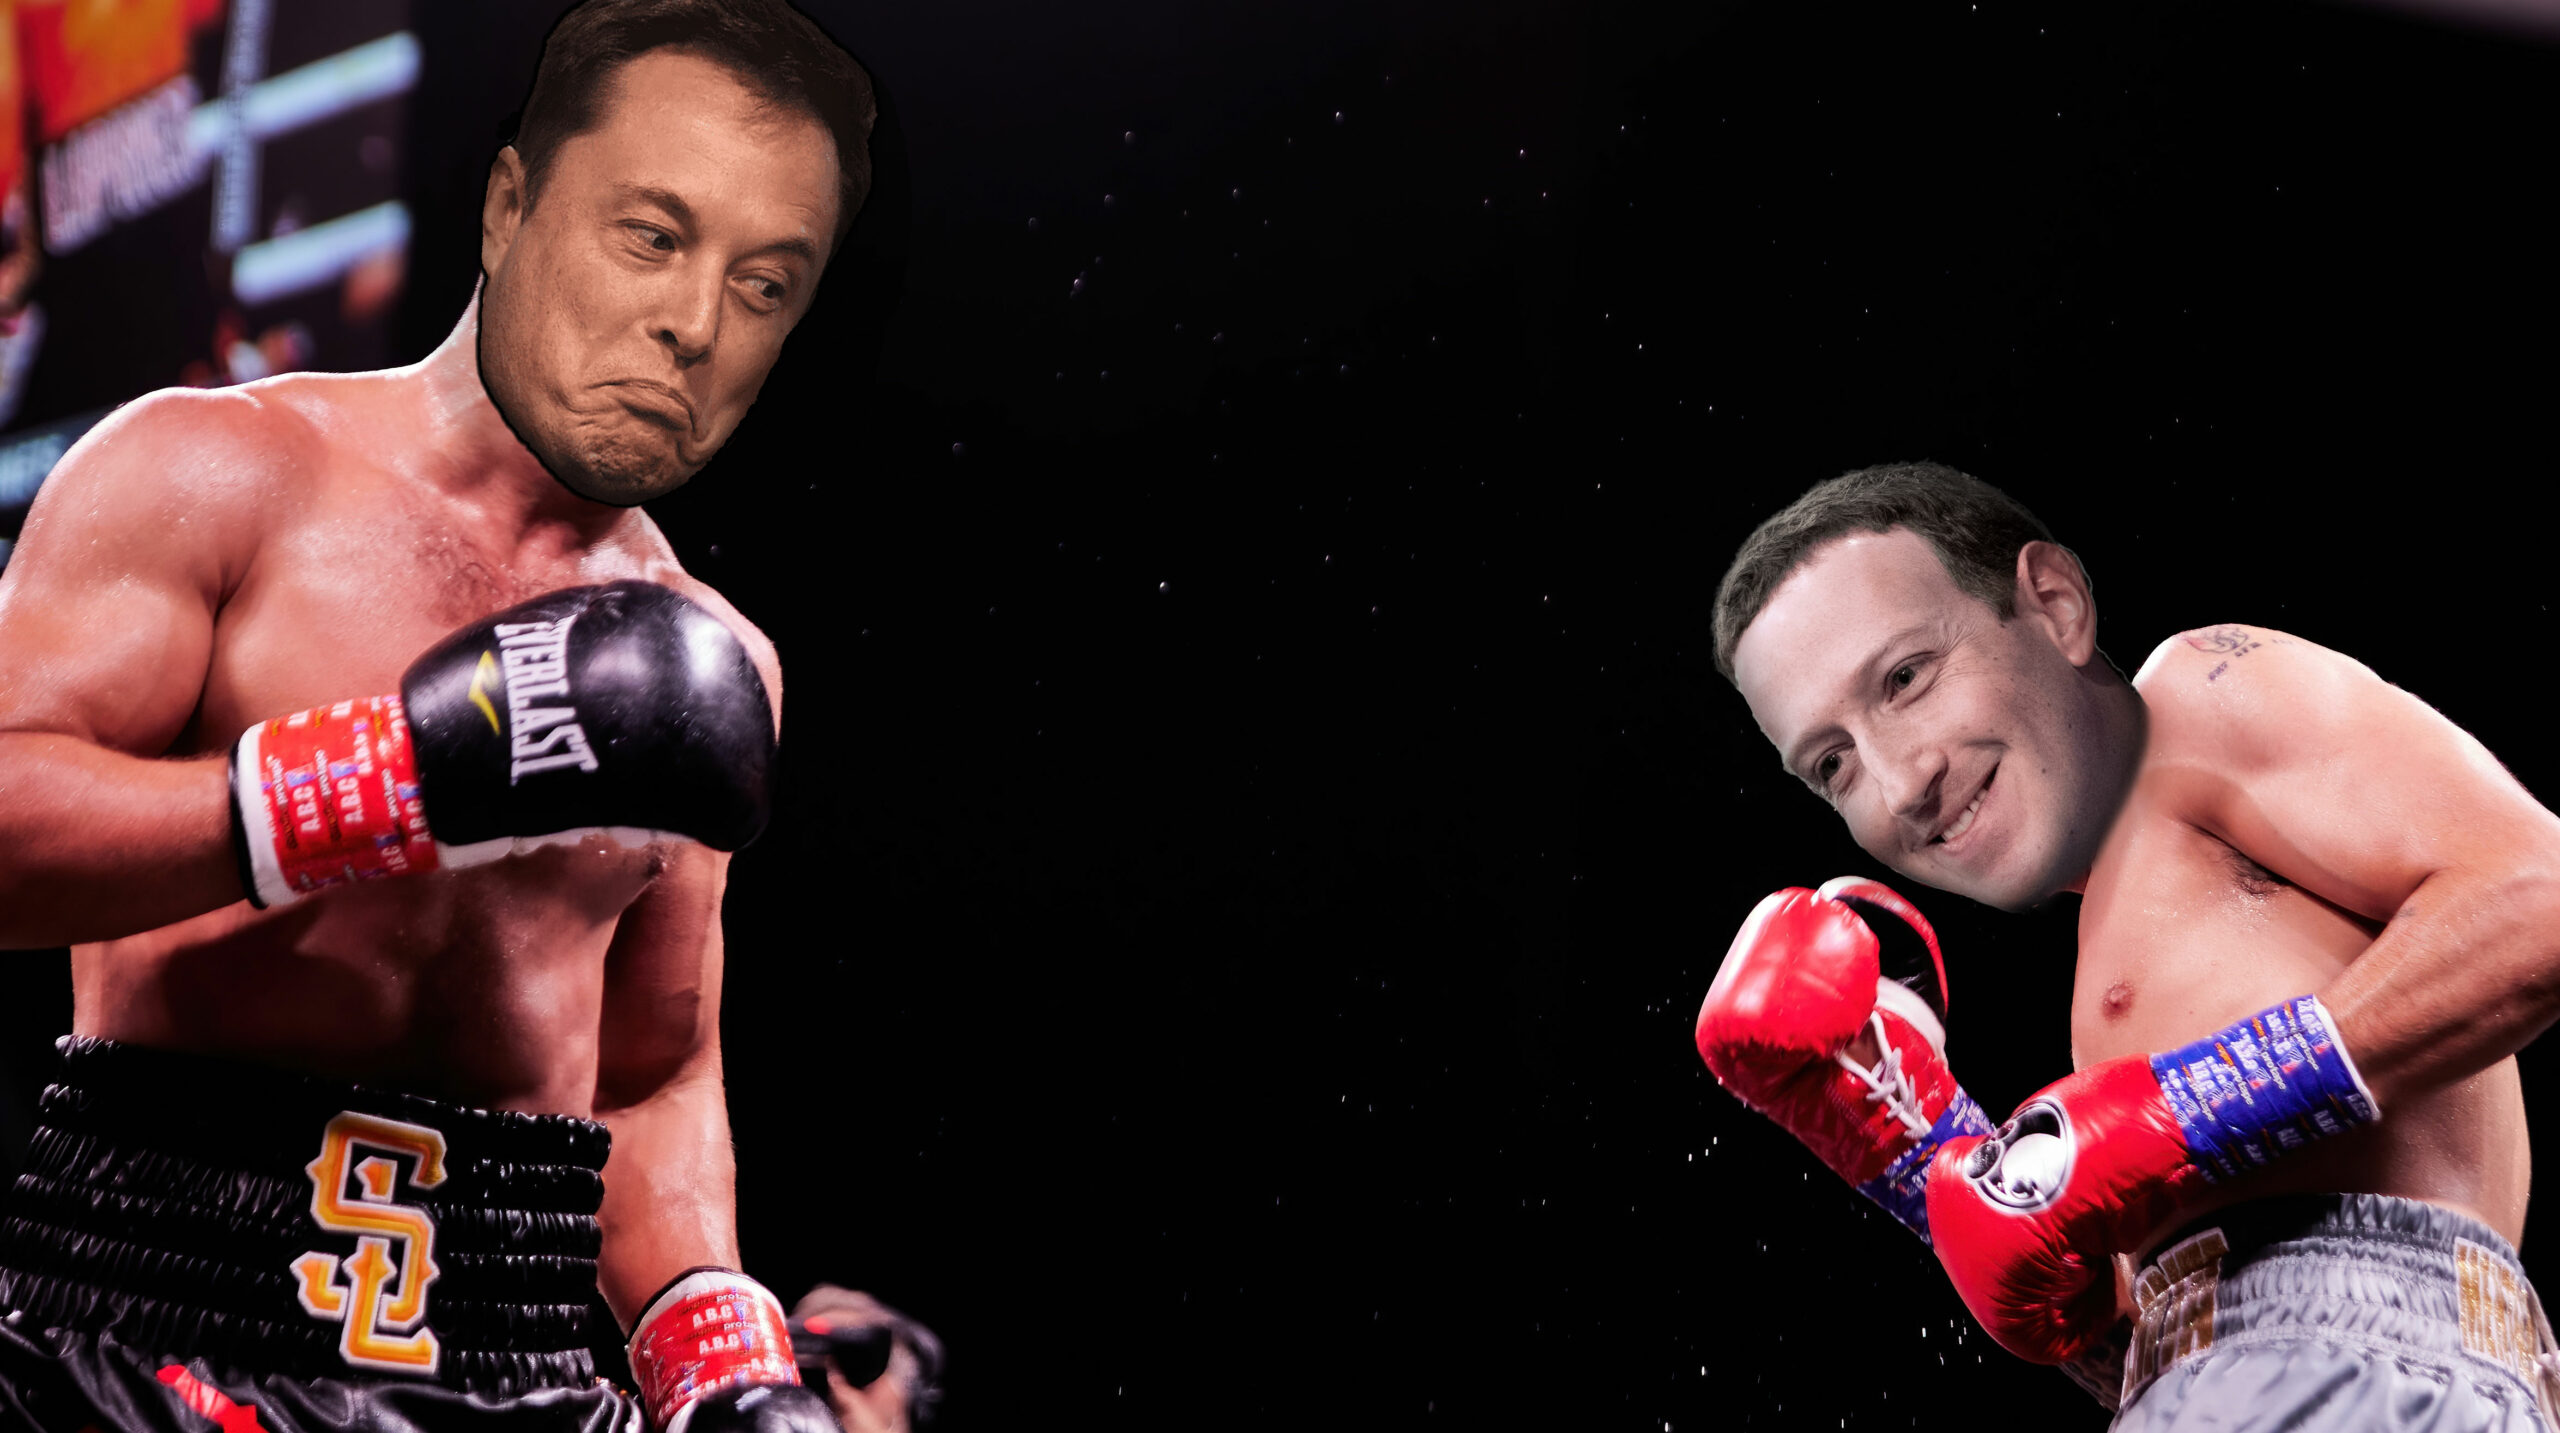 Elon Musk claims Italian prime minister agreed on ‘epic location’ for Zuckerberg fight thumbnail